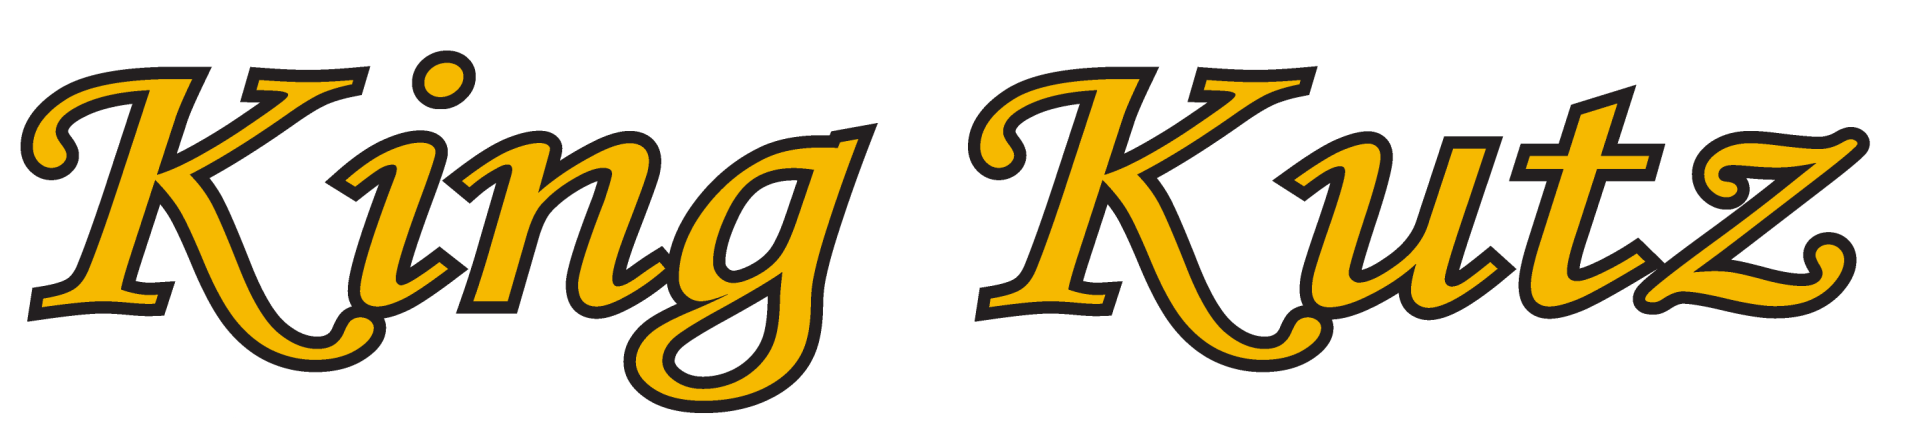 king kutz is written in yellow letters on a white background .